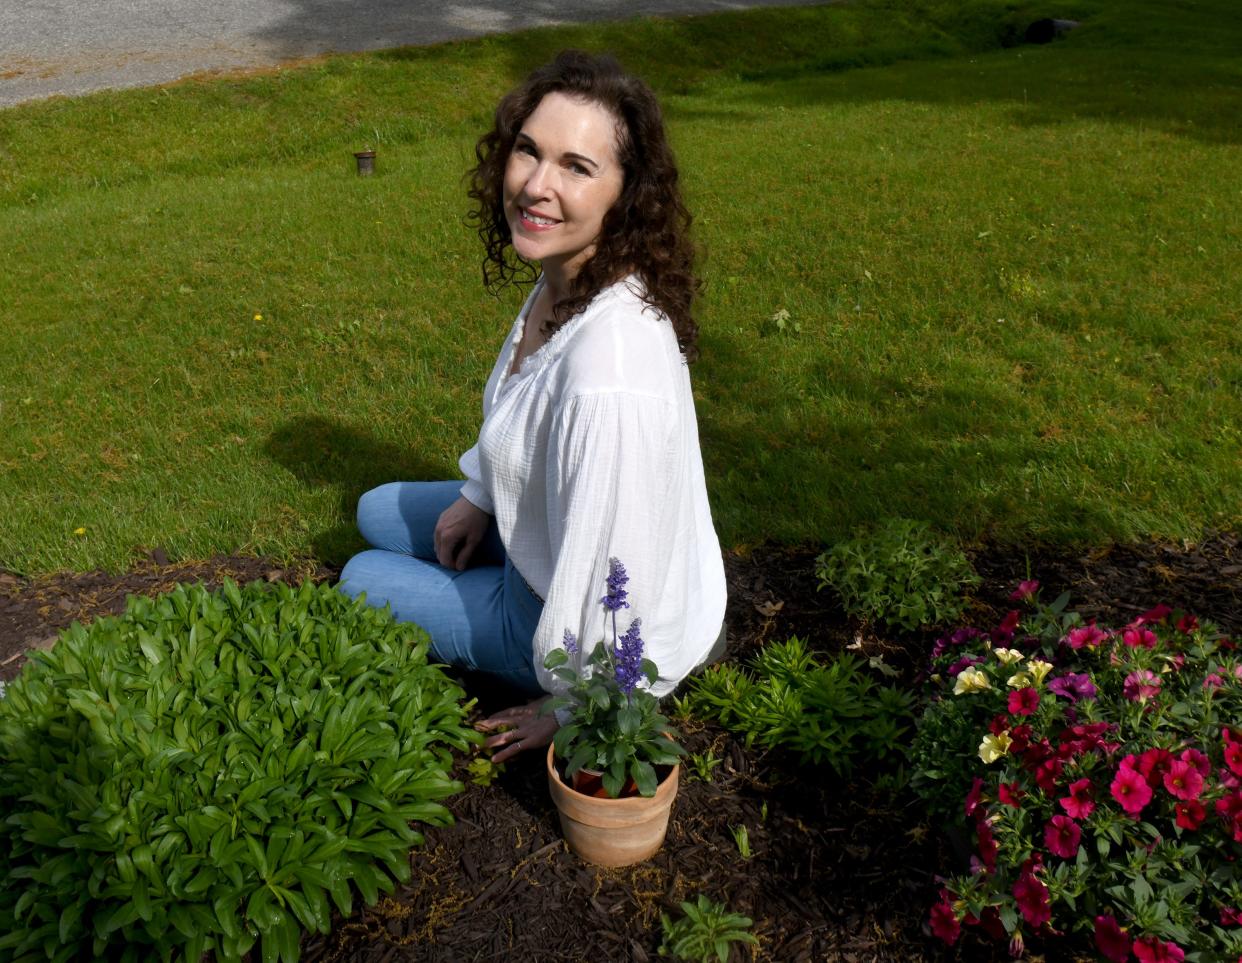 Tracy Teuscher, who lives in Perry Township, is founder of The Buzz Maker and Save Ohio Bees. She has created numerous bumblebee habitats at her home designed for bees to help grow their population.